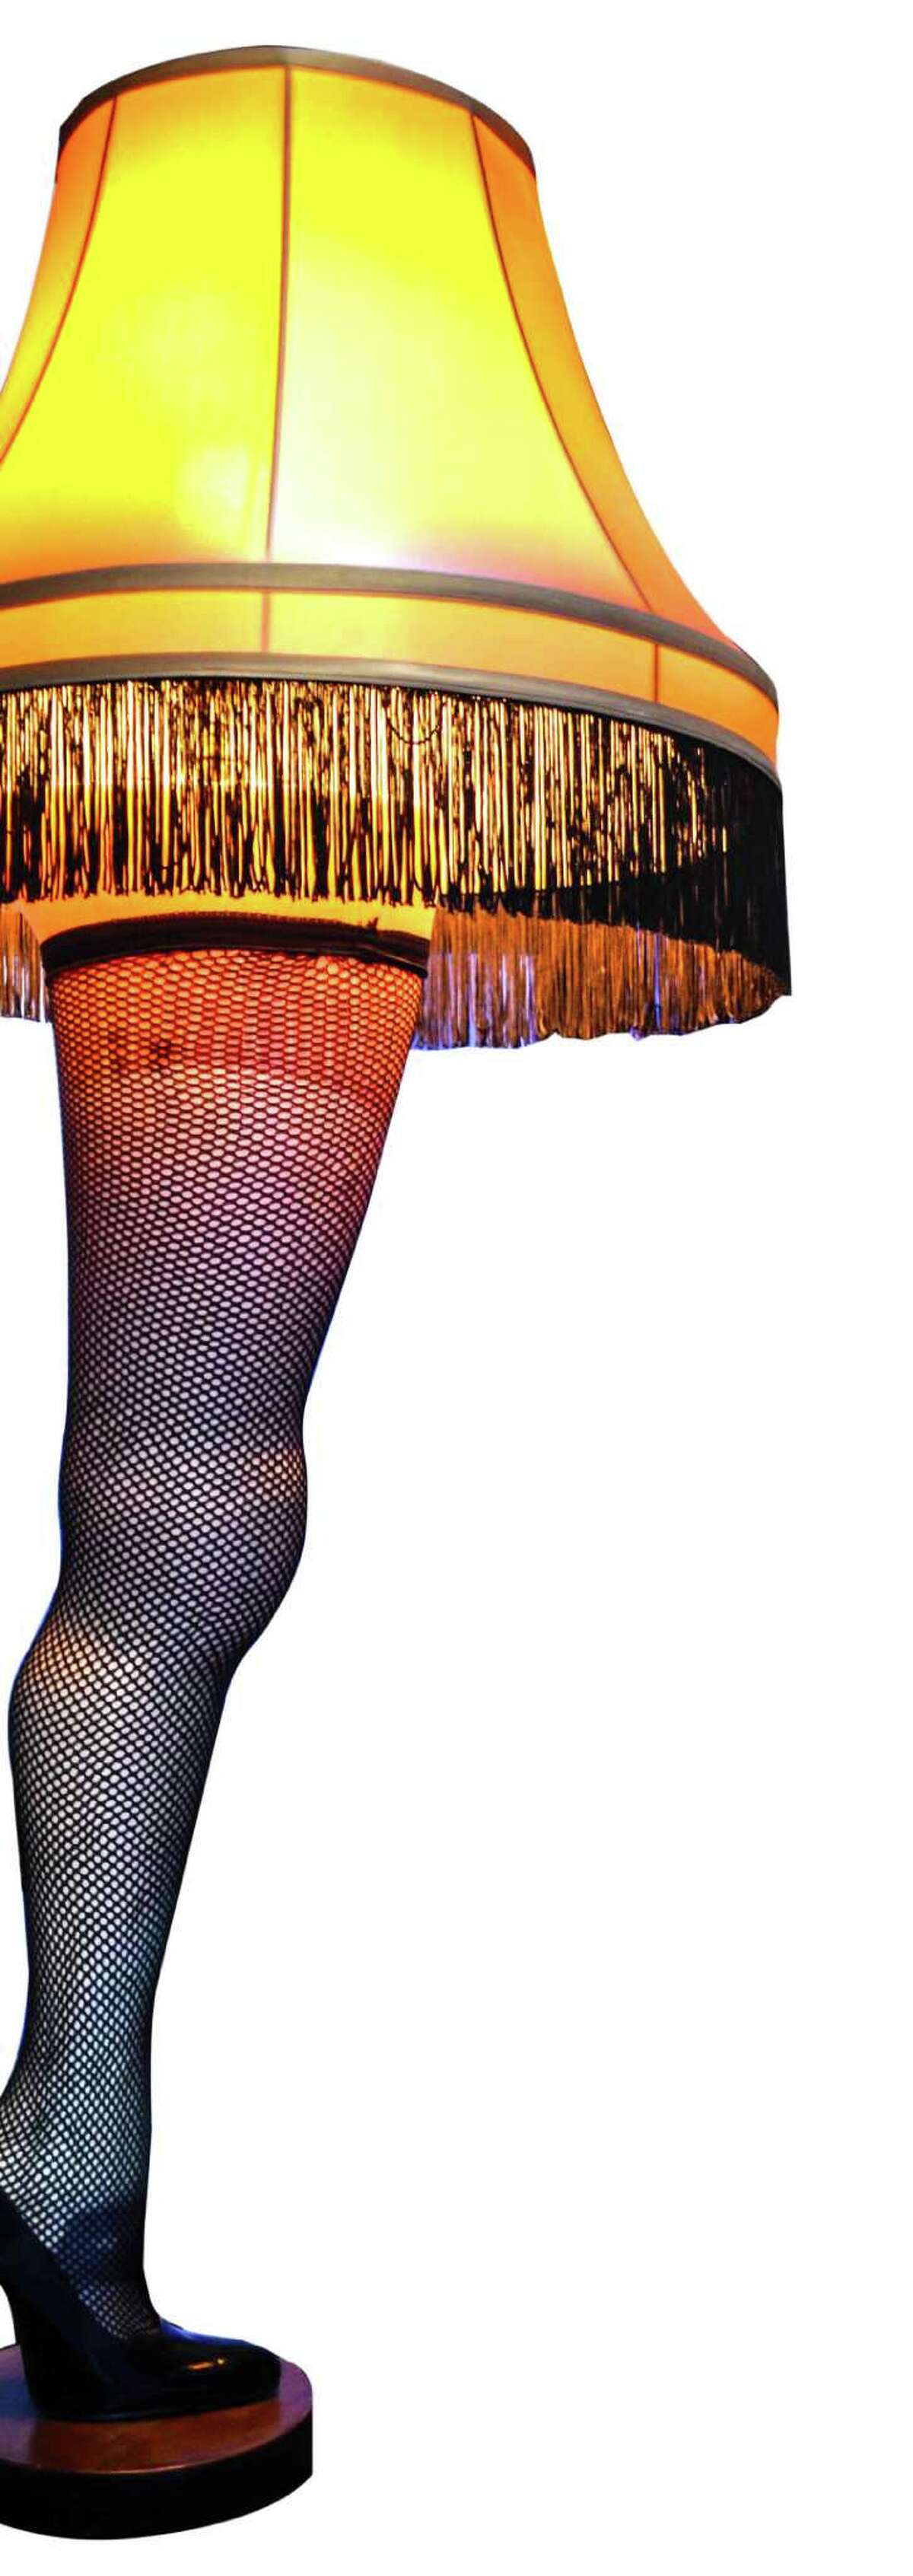 The iconic lamps in “A Christmas Story: The Musical” were created from legs that came from a department store.